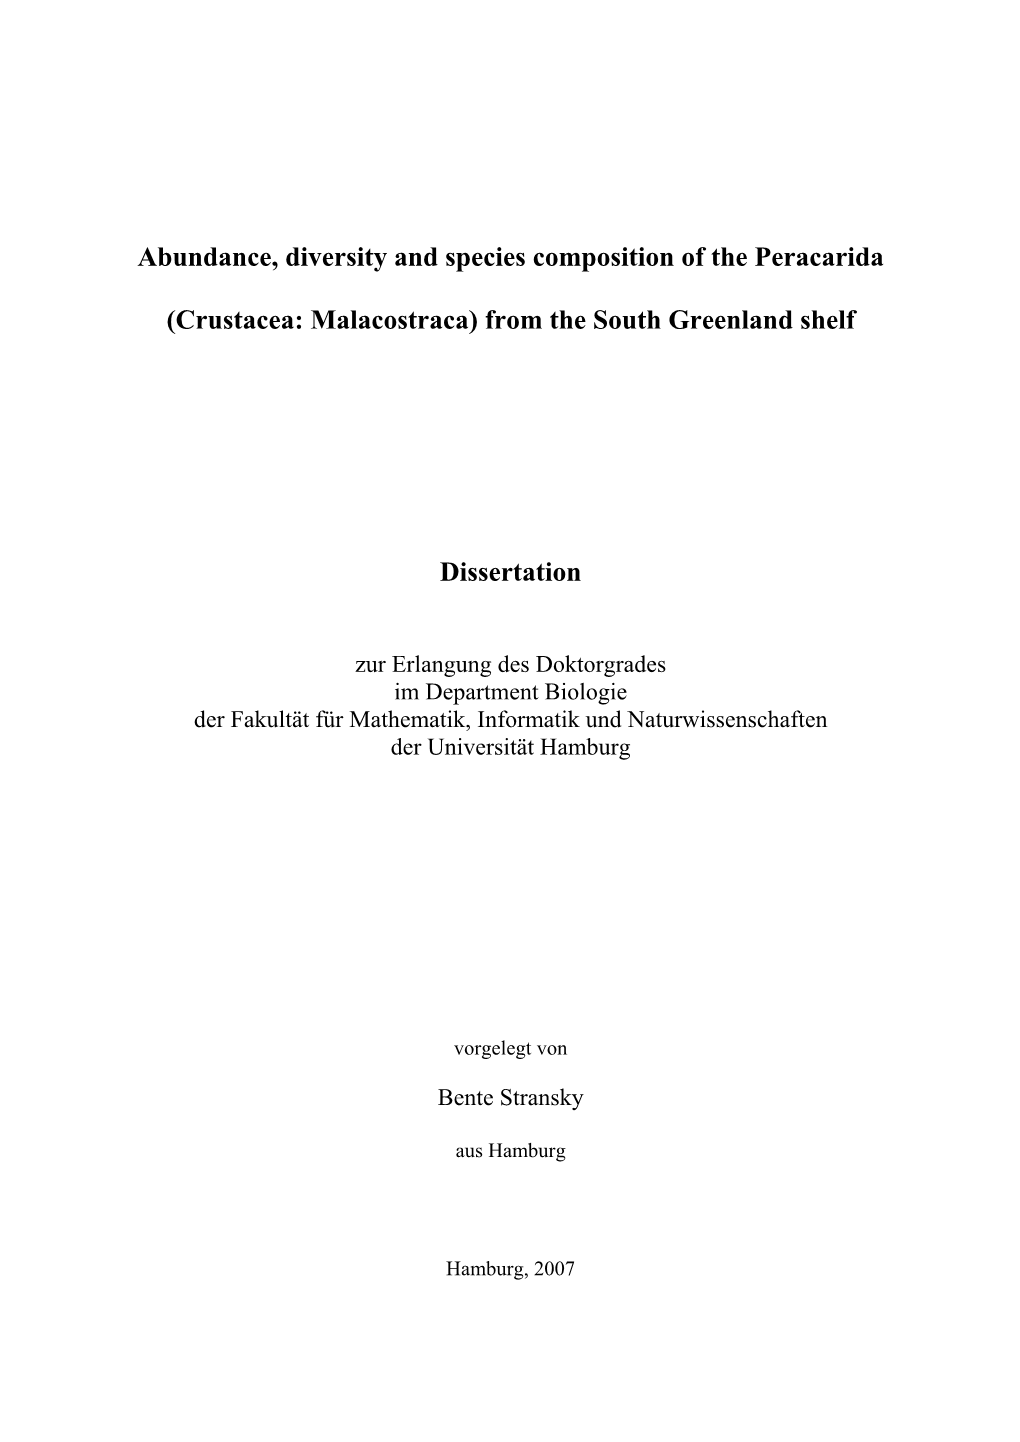 Abundance, Diversity and Species Composition of the Peracarida